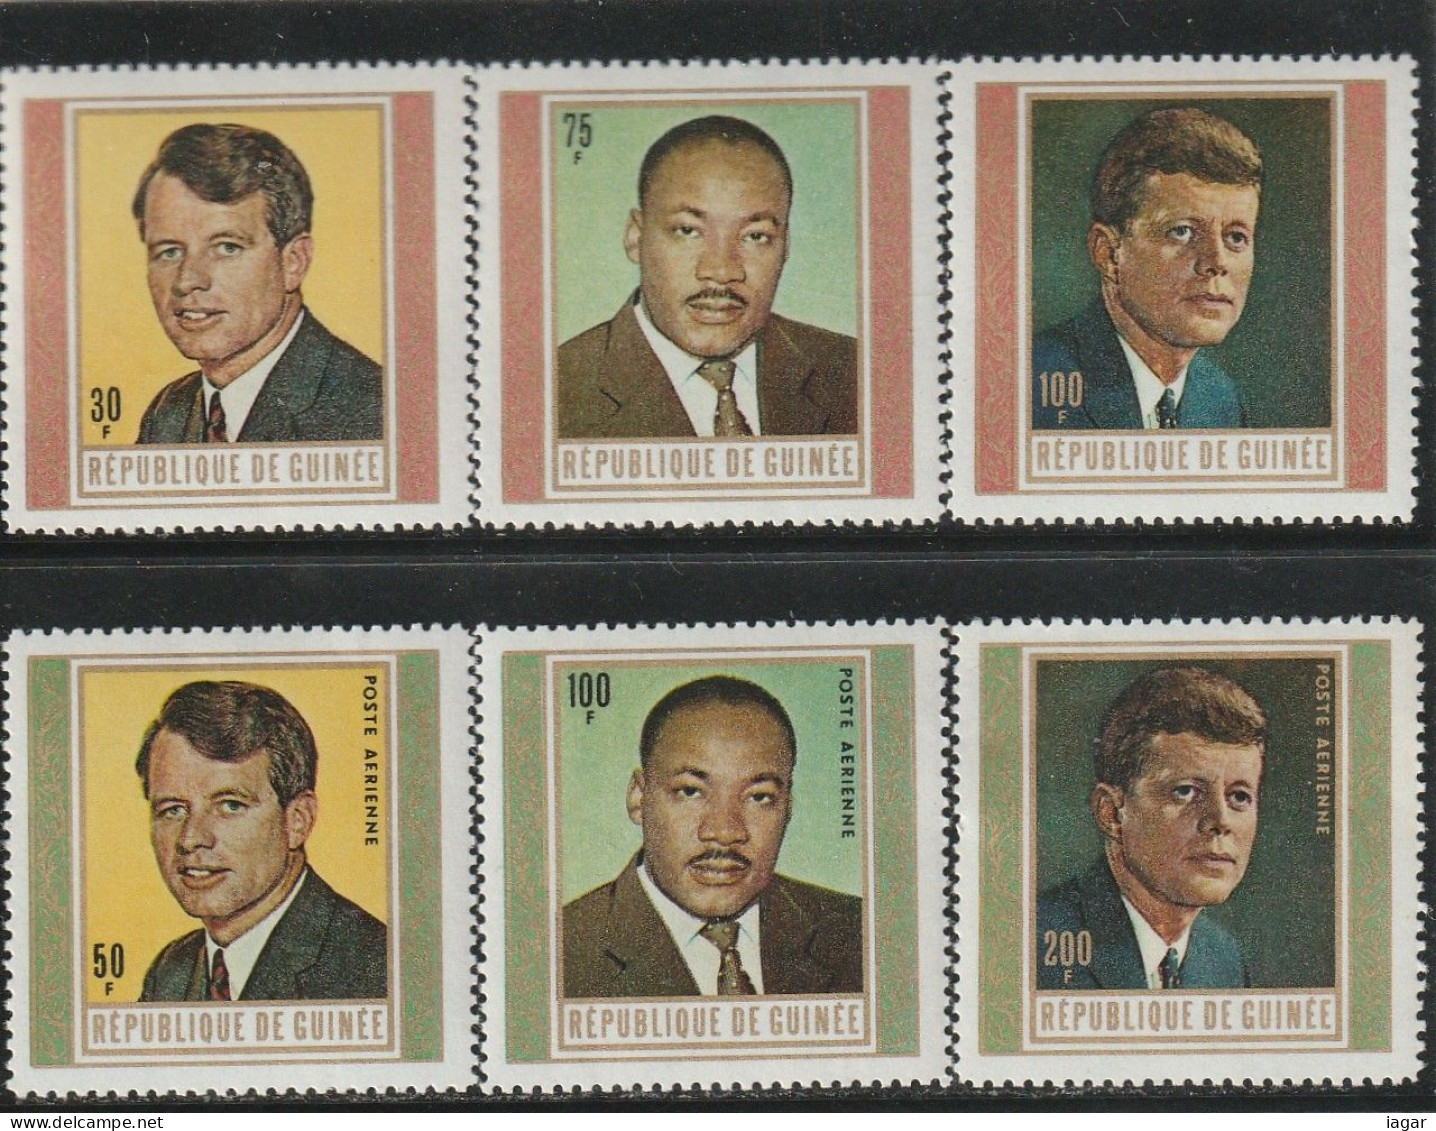 THEMATIC  FAMOUS PEOPLE: MARTIN LUTHER KING, JOHN AND ROBERT KENNEDY  - GUINEE - Martin Luther King